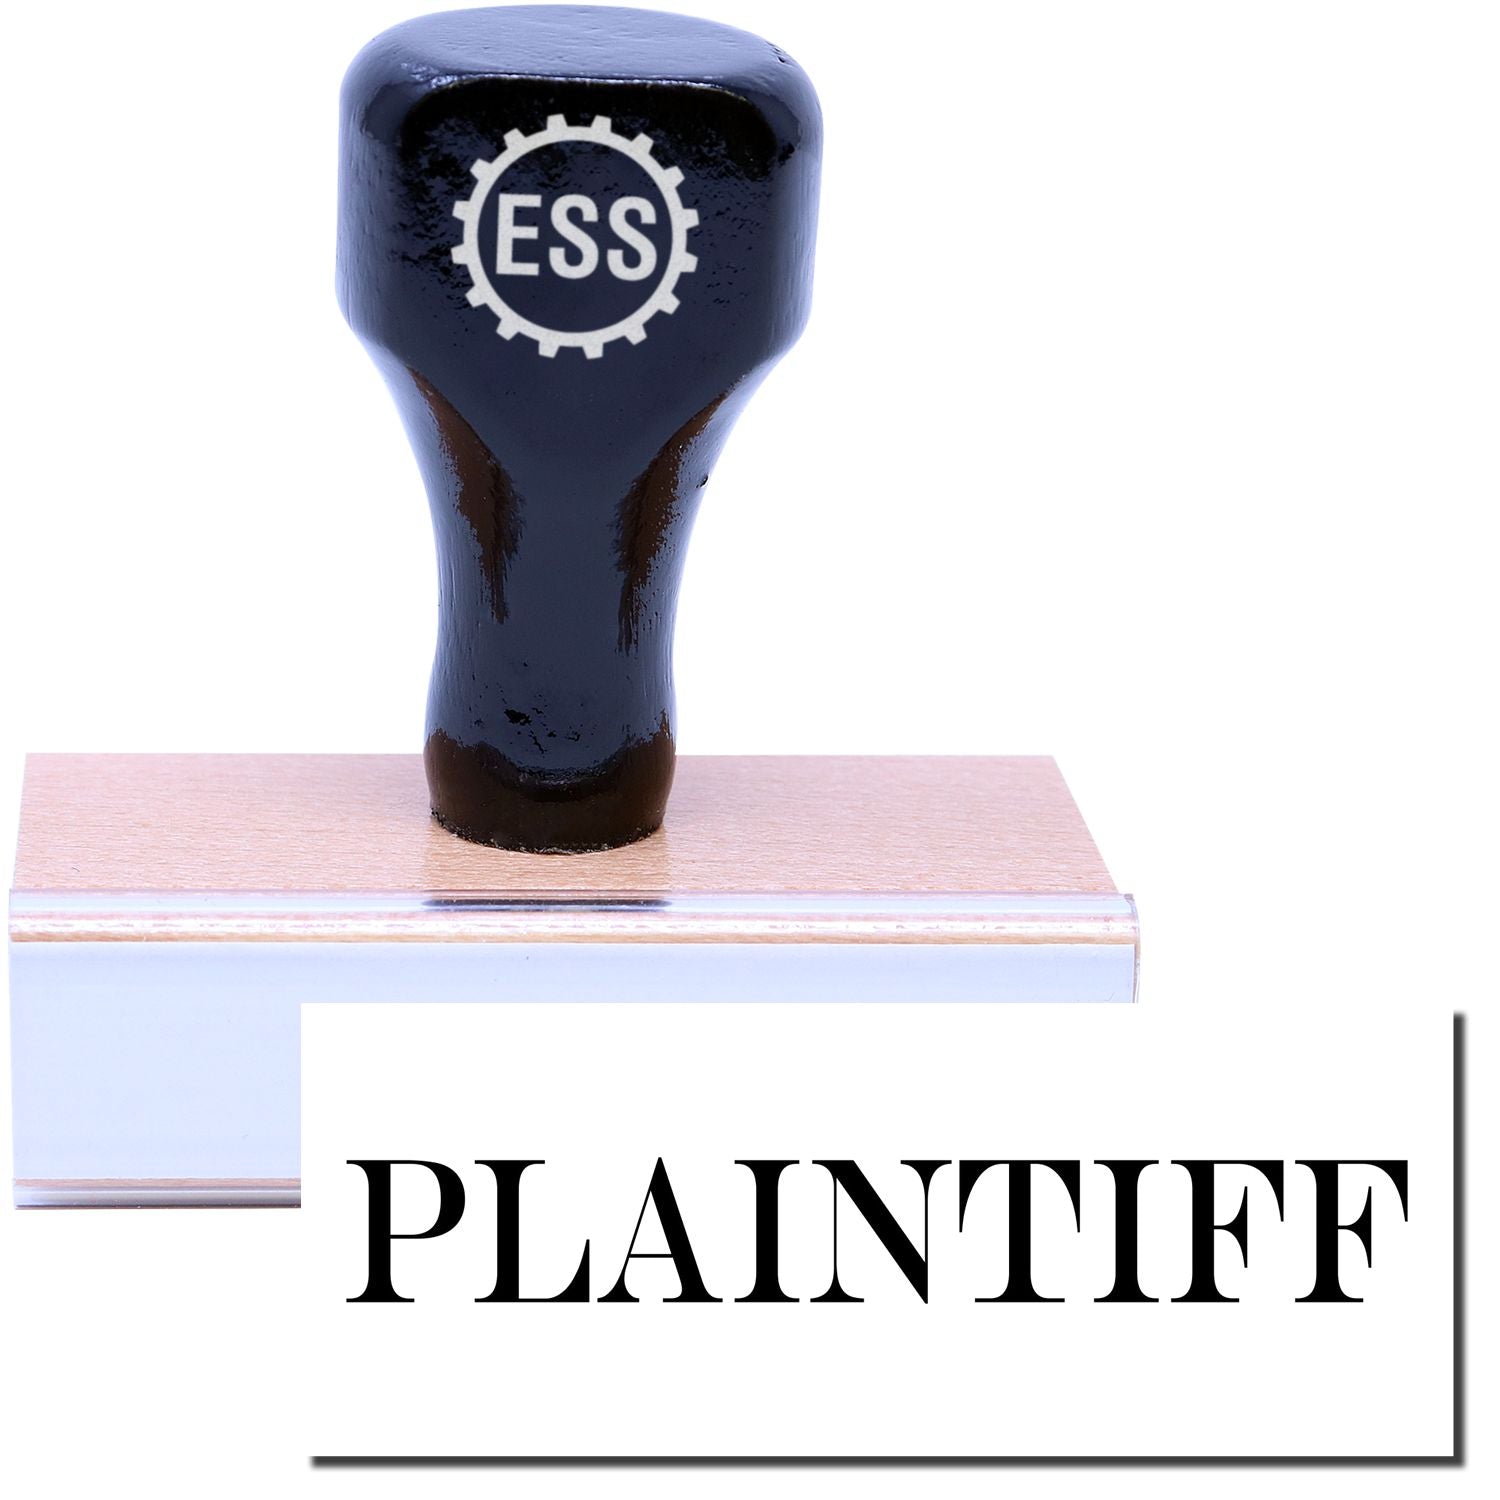 A stock office rubber stamp with a stamped image showing how the text "PLAINTIFF" is displayed after stamping.